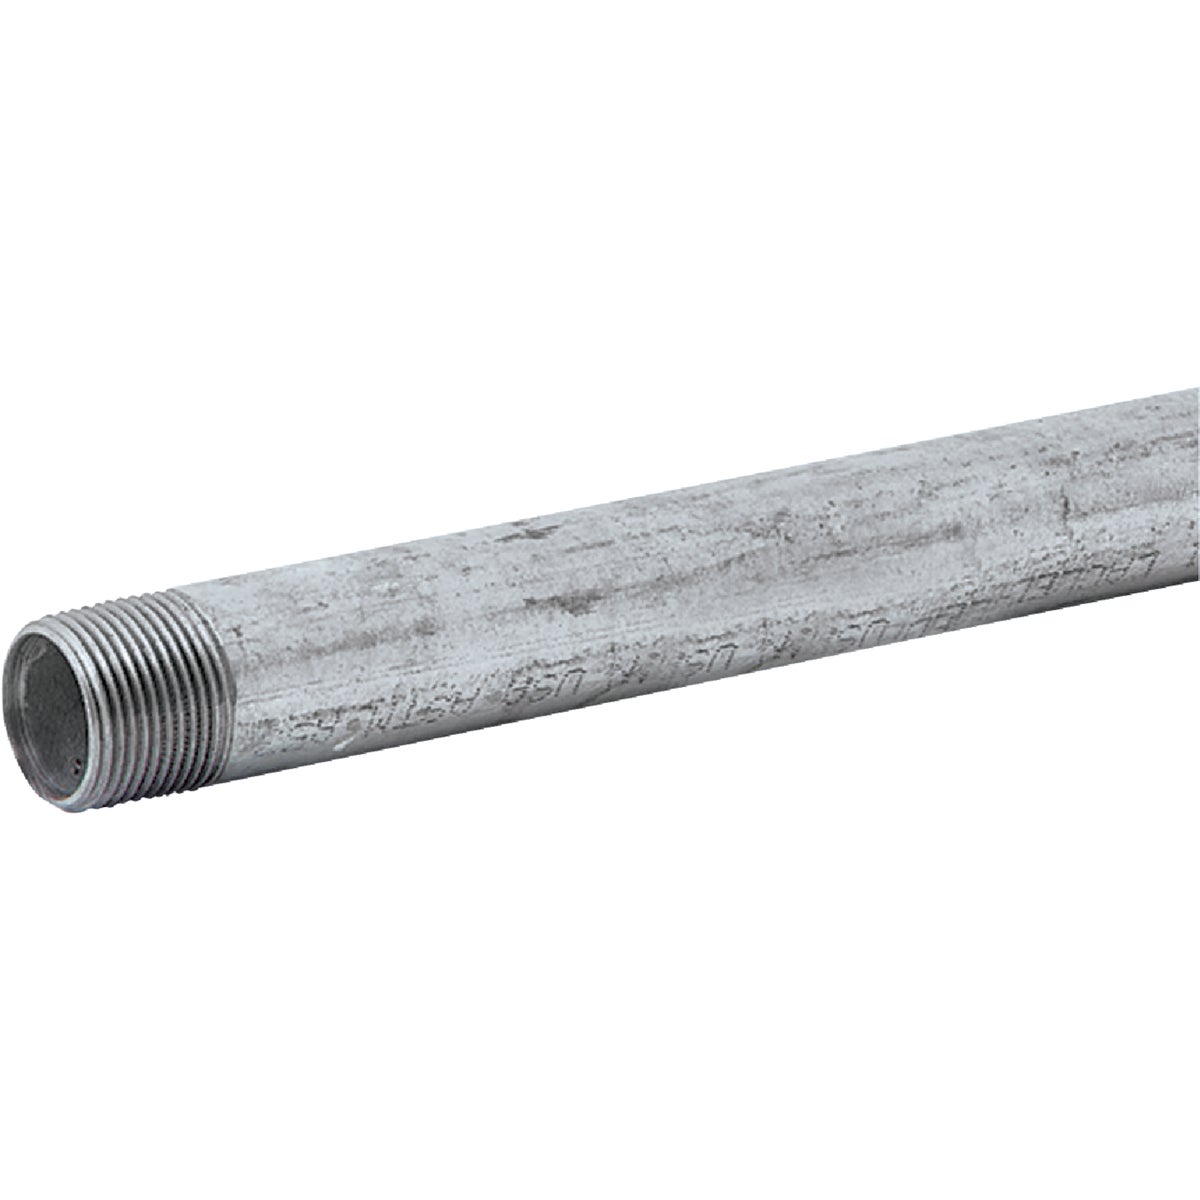 Southland 2 In. x 10 Ft. Carbon Steel Threaded Galvanized Pipe